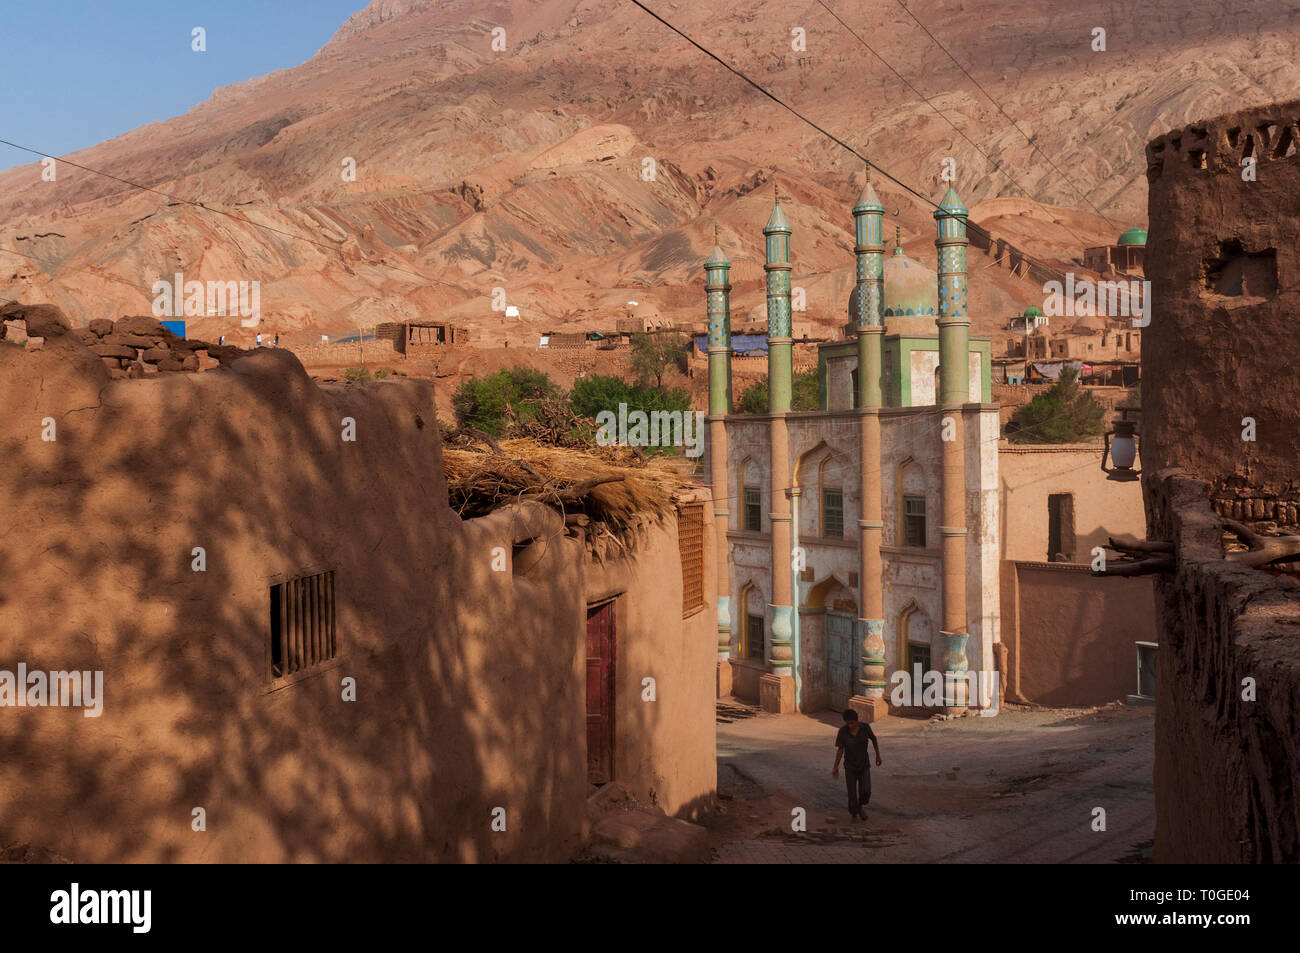 Tuyog, Turpan, China - August 12, 2012: A man passing in front of the mosque at the Uyghur village of Tuyog, with mountains on the background, Xinjian Stock Photo